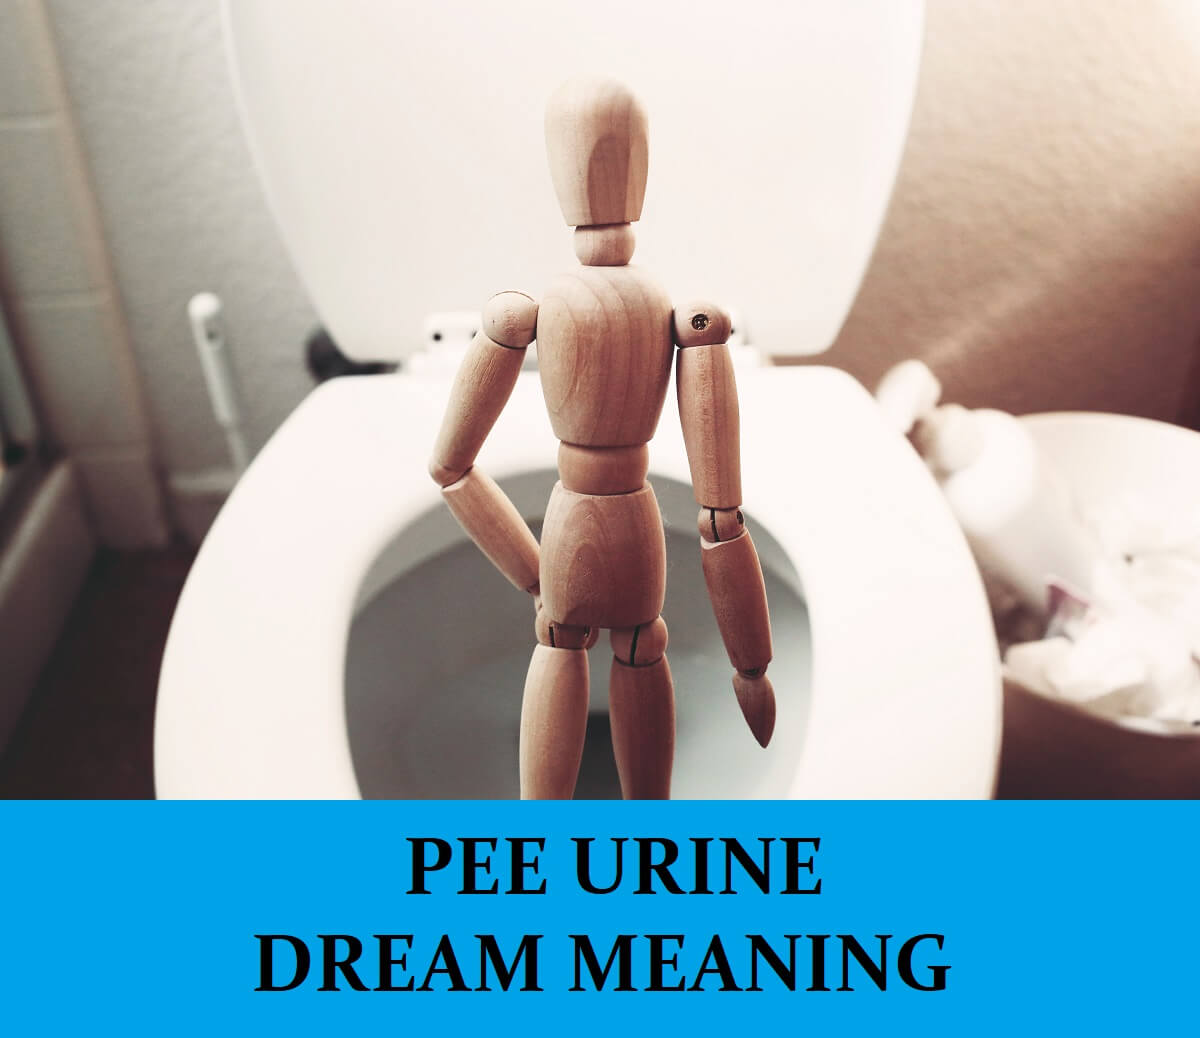 dream meaning urinating